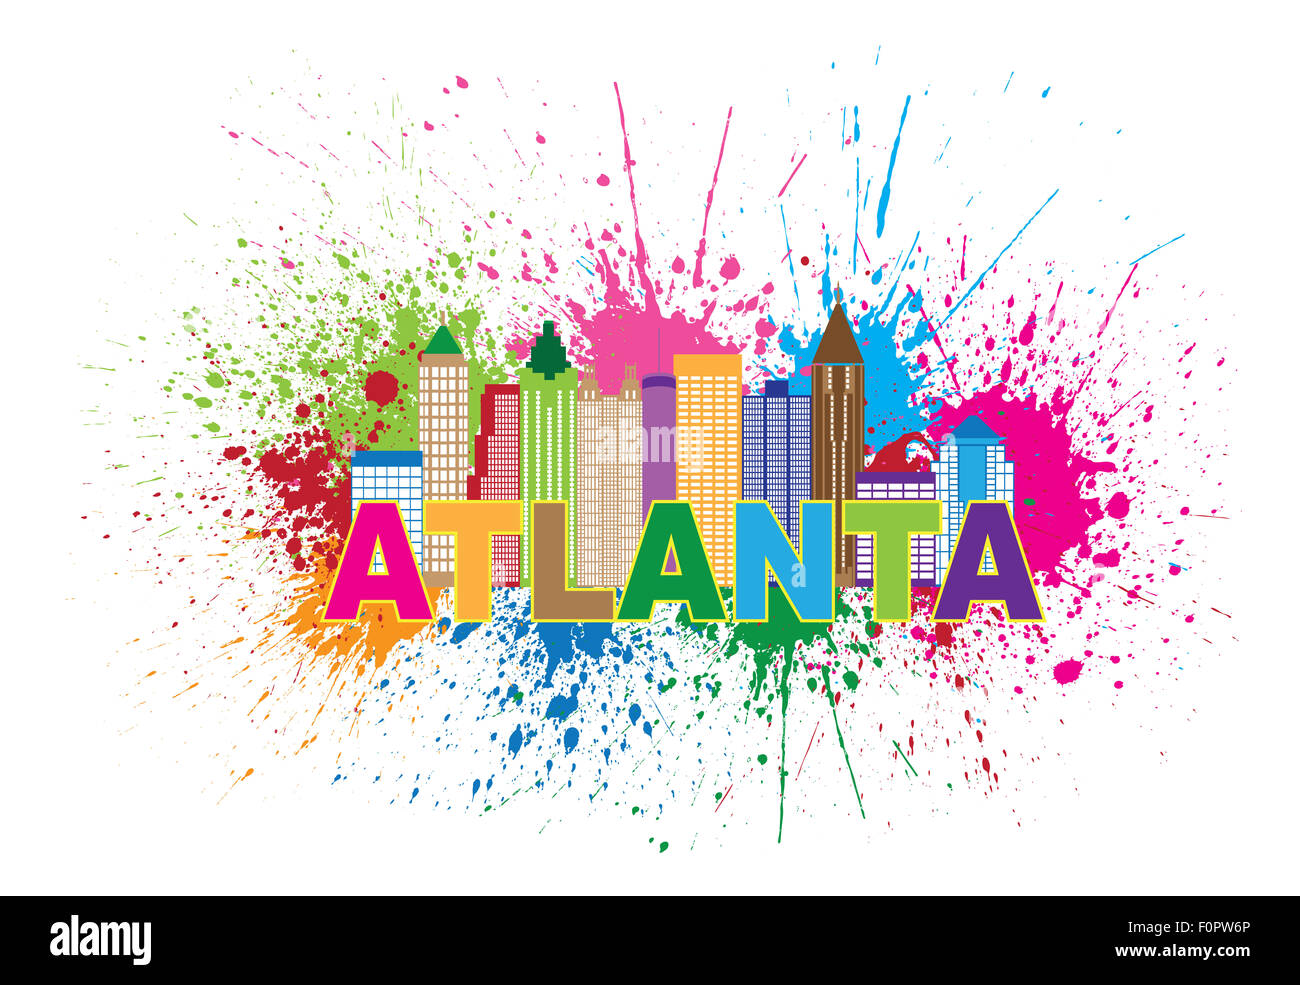 Atlanta Georgia City Skyline Paint Splatter Abstract with Colorful Text llustration Stock Photo